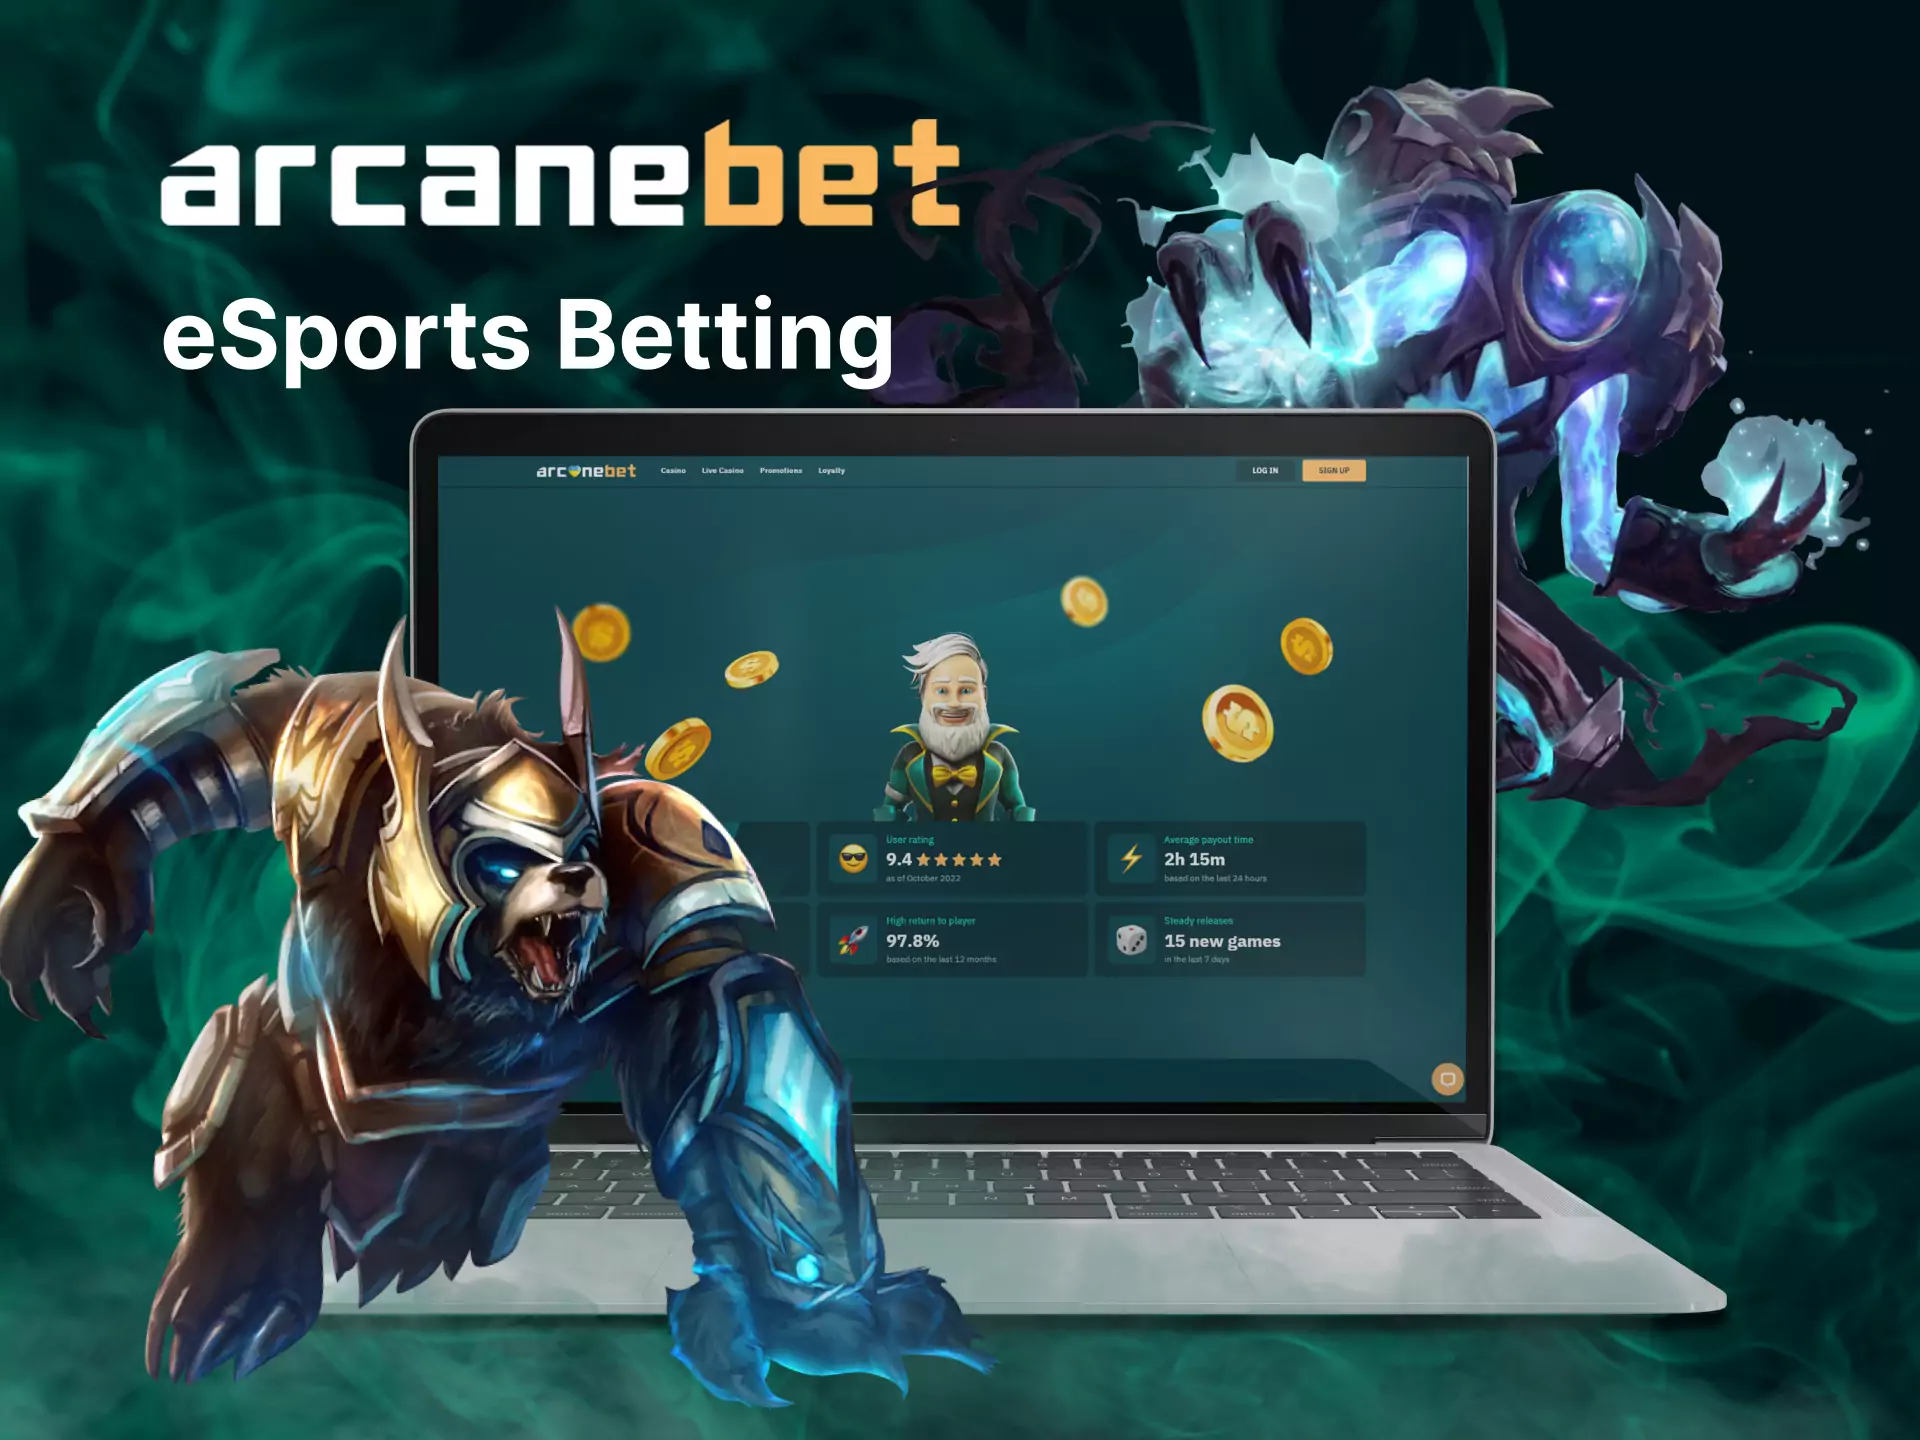 Place bets on esports in Arcanebet.